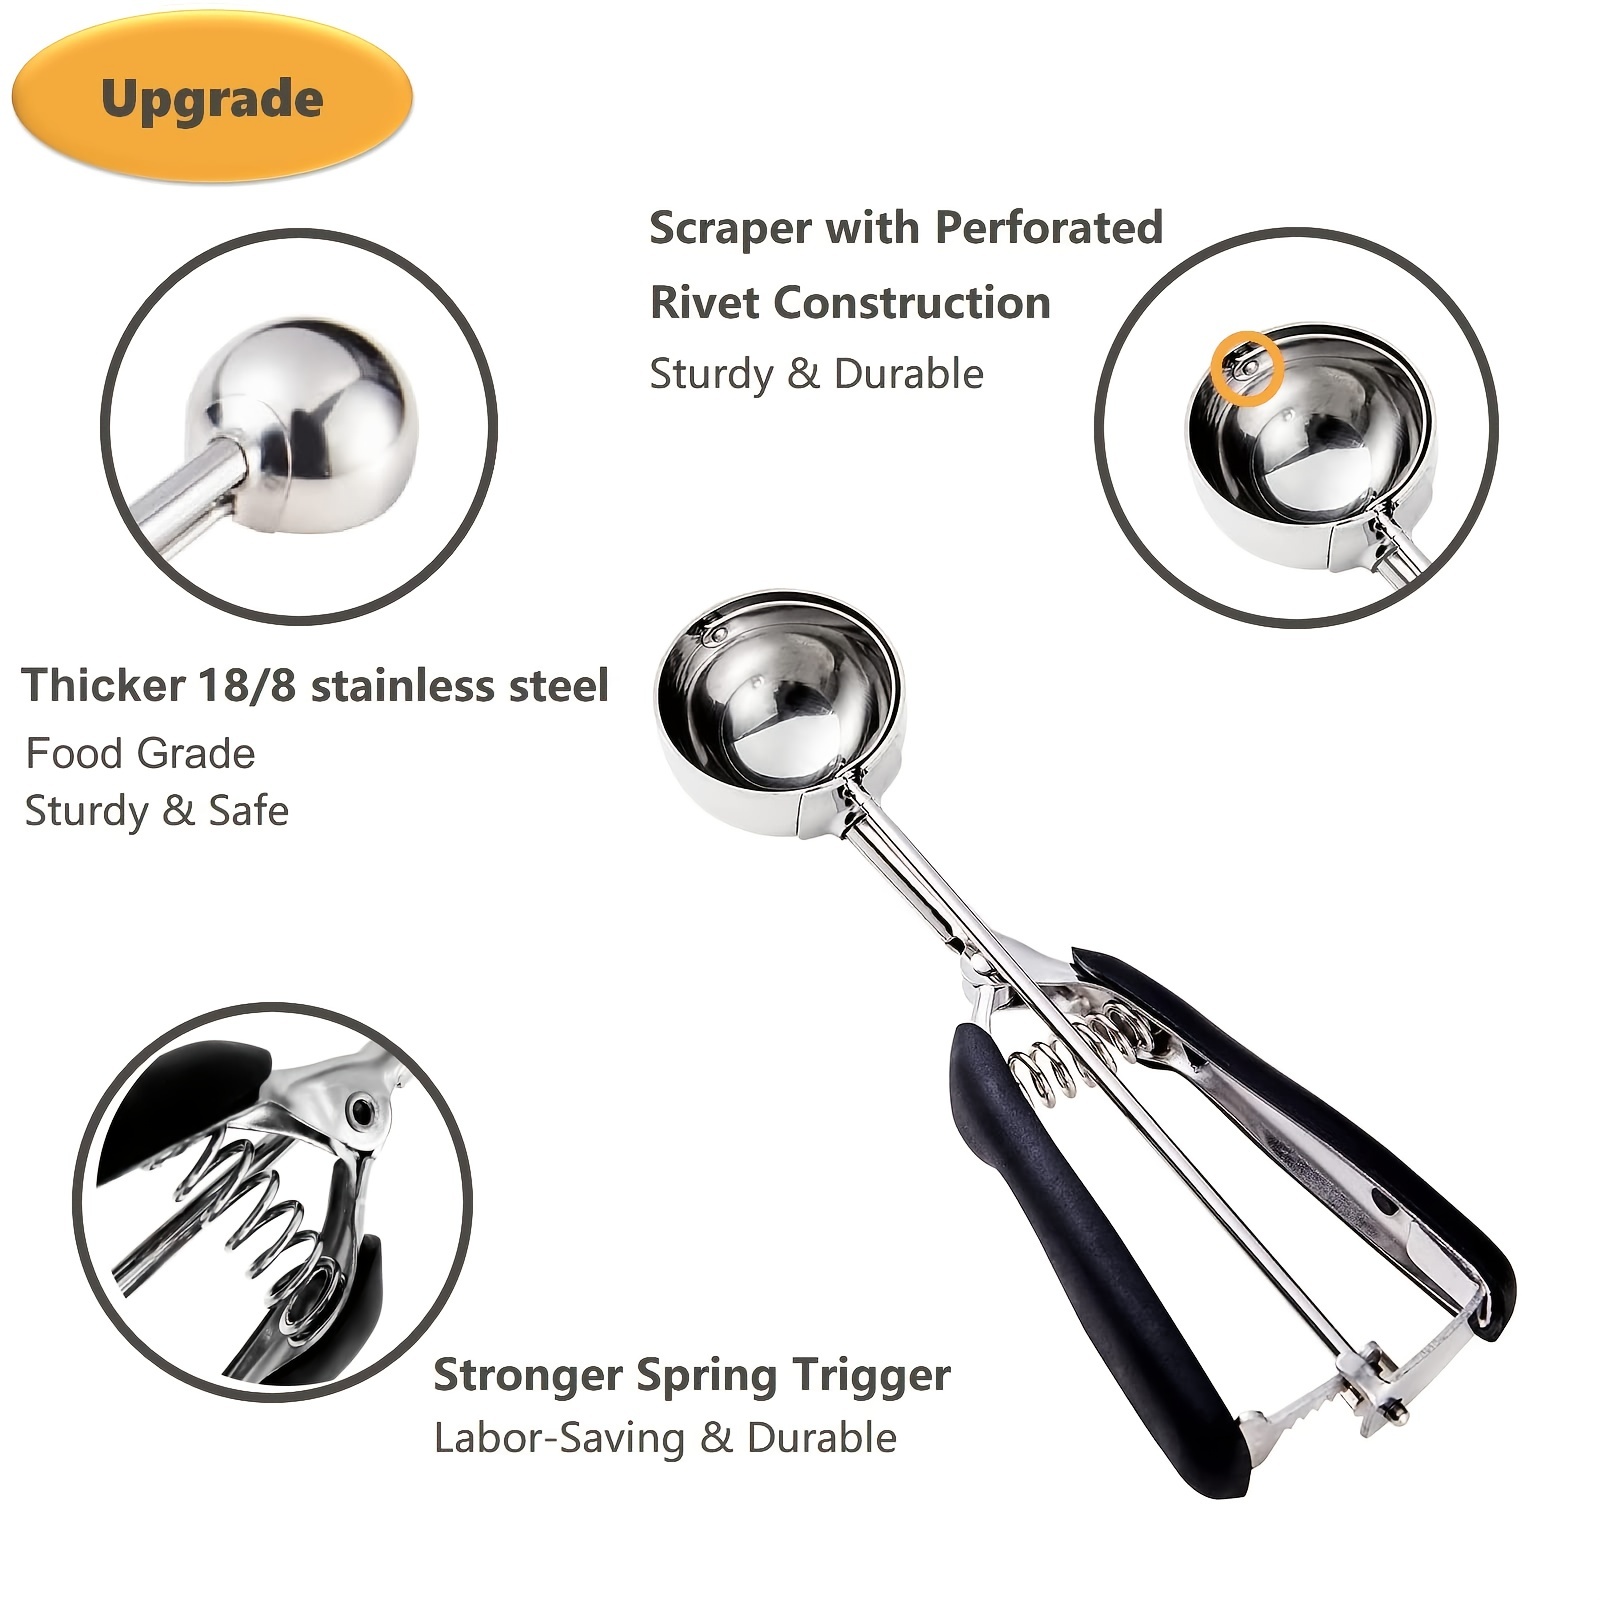 Cookie Scoop Set of 3 - Stainless Steel Ice Cream Scooper with Trigger,  Small, Medium and Large Cookie Scoops for Baking, Easy to Clean, Highly